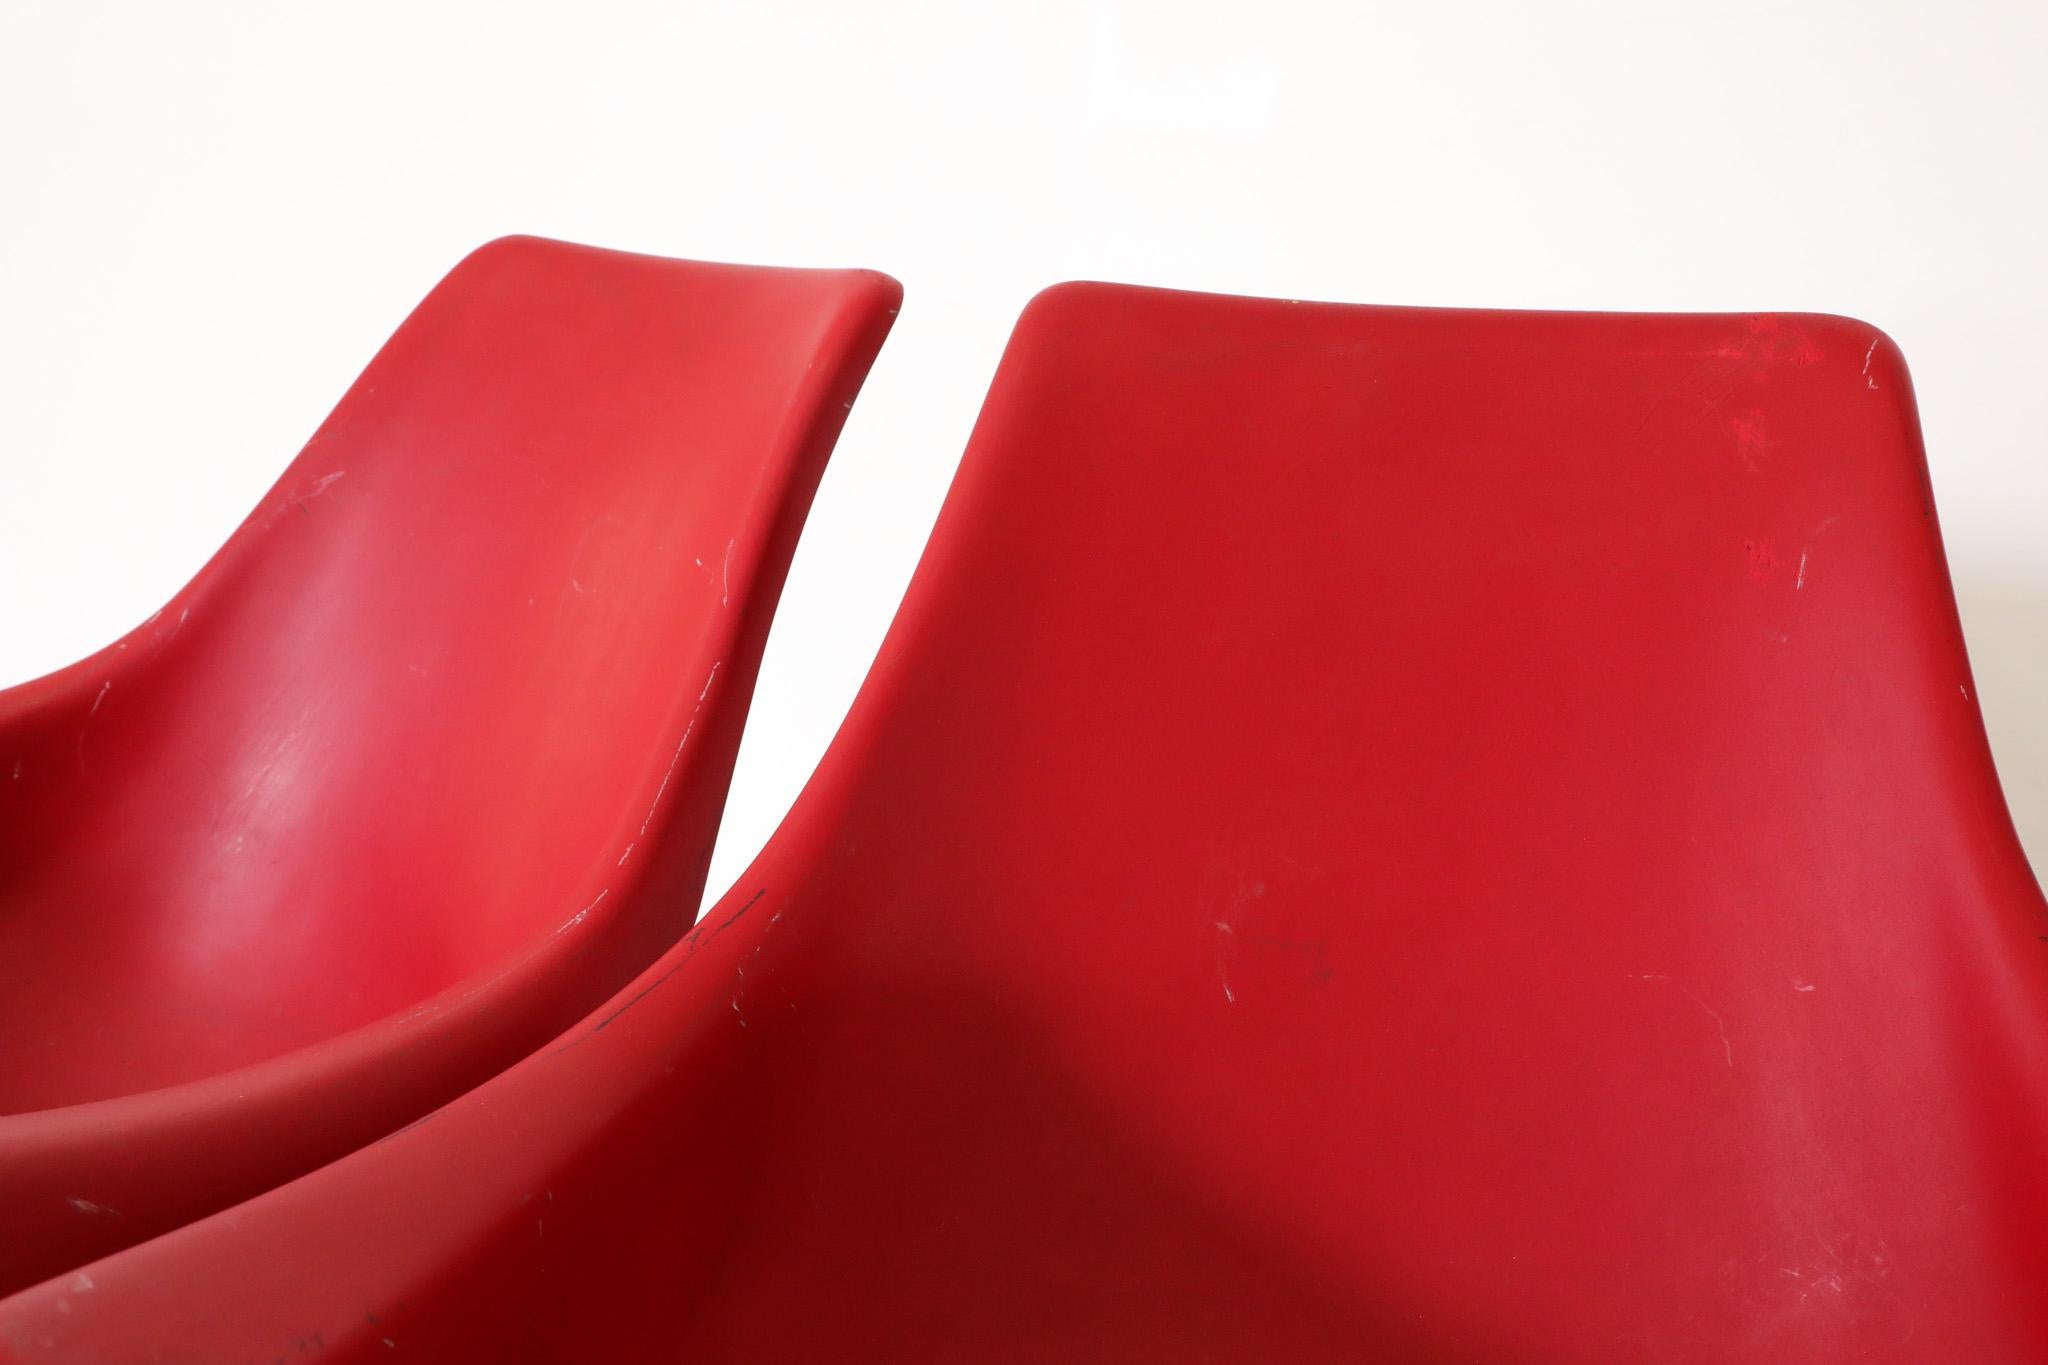 Late 20th Century Mod Space Age Saarinen Inspired Red Plastic Moulded Chairs with Pedestal Base For Sale